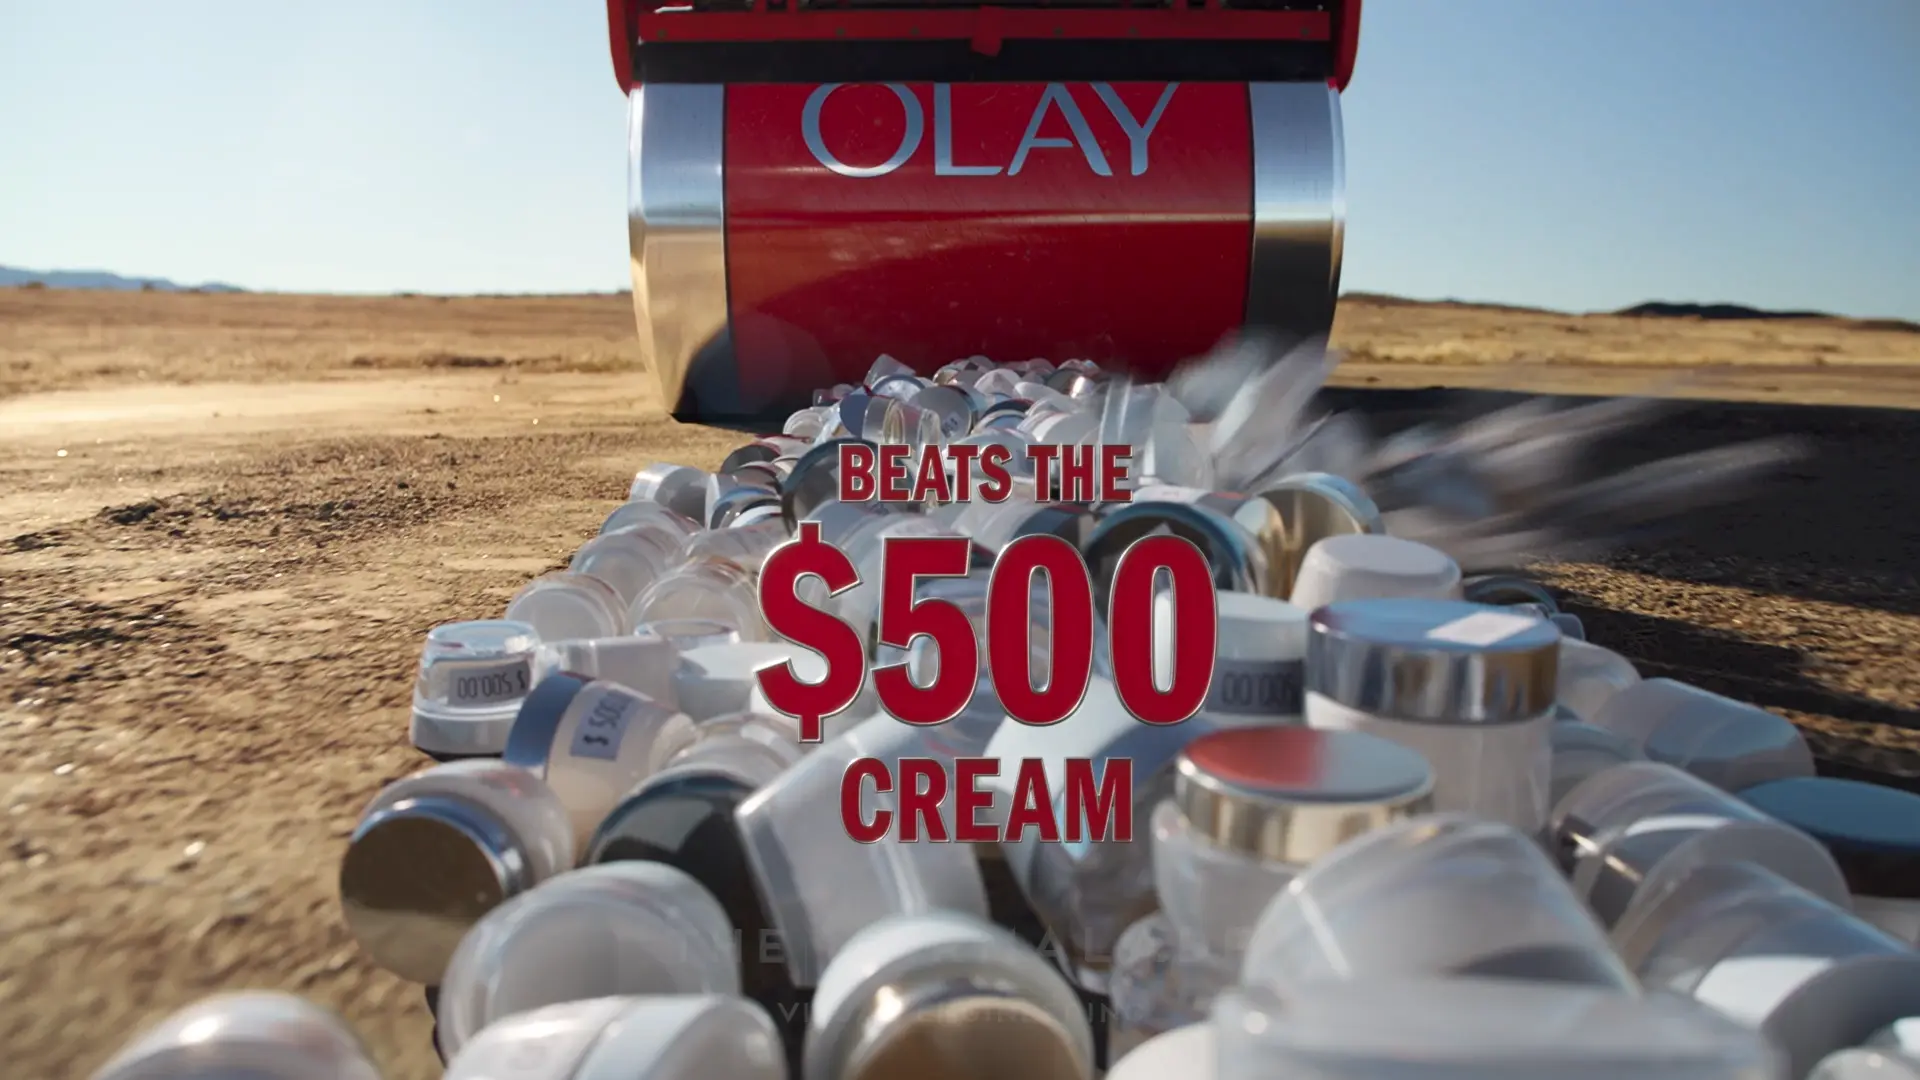 
          

              Client: OLAY;
              Project: Steamroller;
              Postproduction: The Marmalade;
              ;

              In the Olay steamroller commercial, 
              my role was focused on creating the superimposed statements that represented the competitive edge of Olay over its rivals.
              Witness the defining moment where high-end meets high-value in this visual spectacle.;;
              